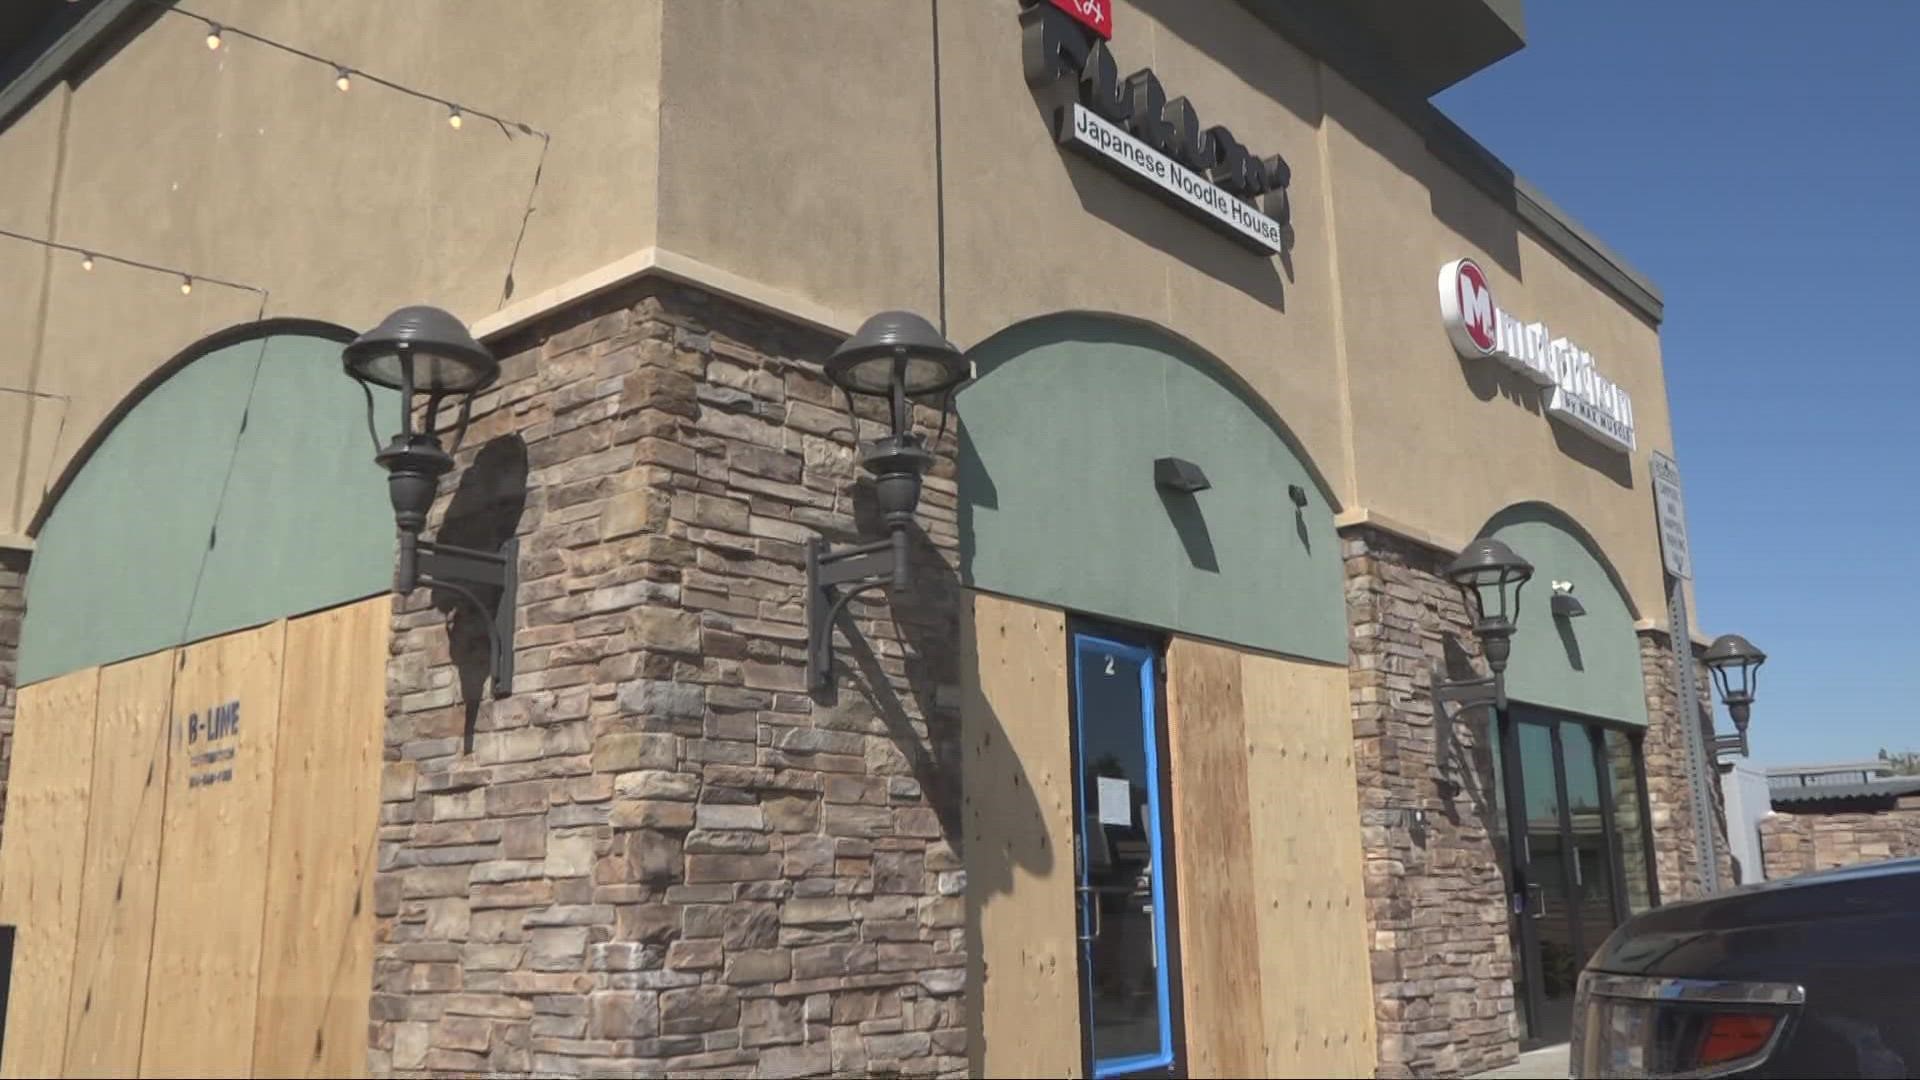 The most recent vandalism left windows shattered and the owner of Fukumi Ramen feeling unsafe. The Citrus Heights Police Department is investigating.